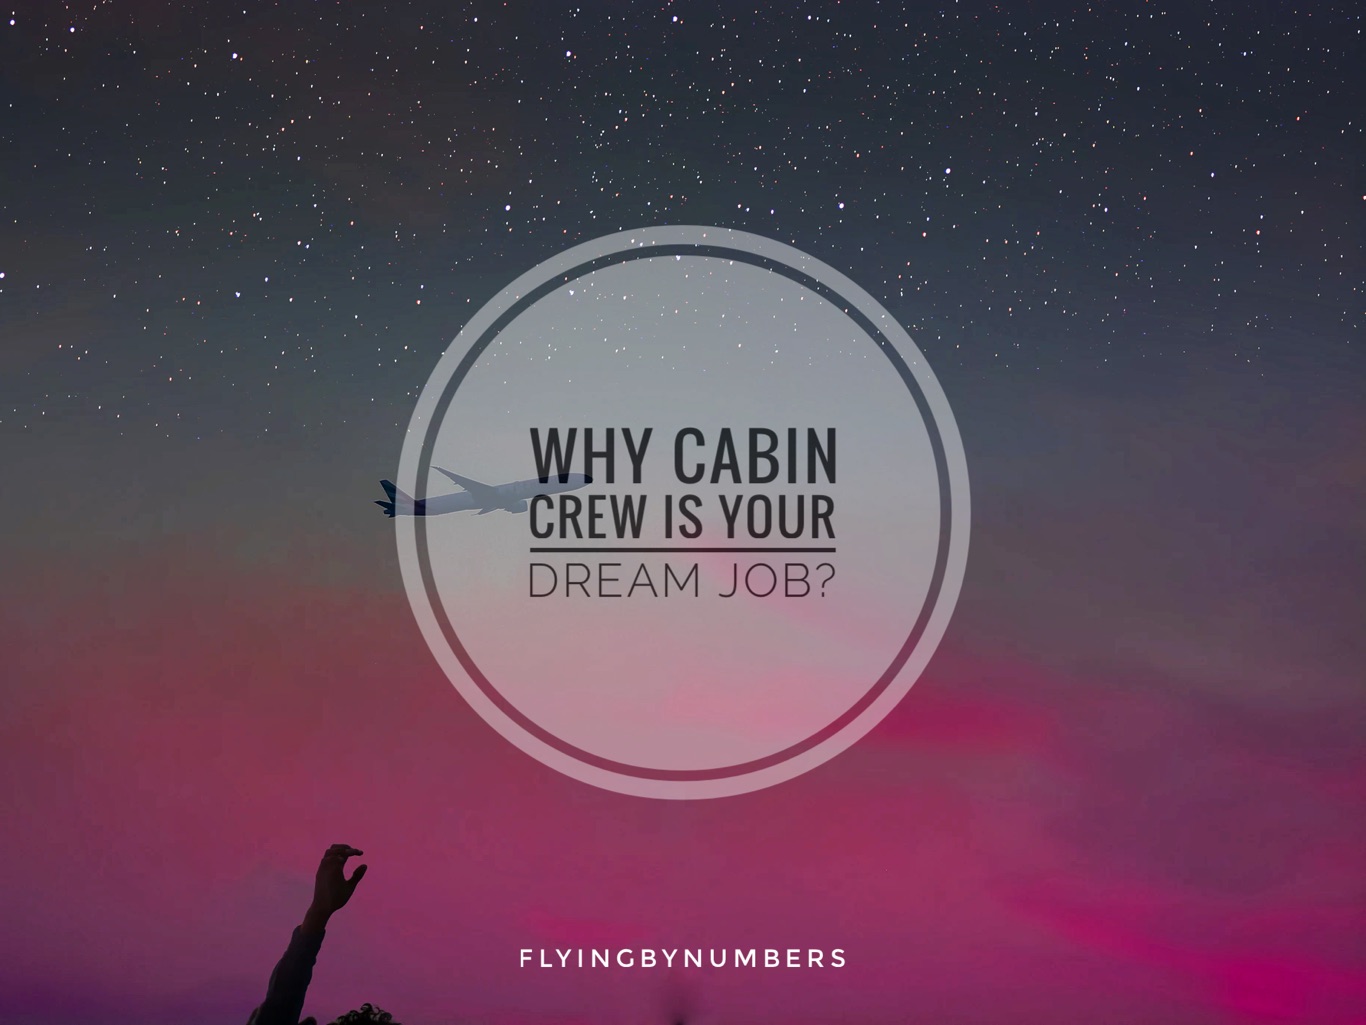 A look at why being cabin crew is a dream job